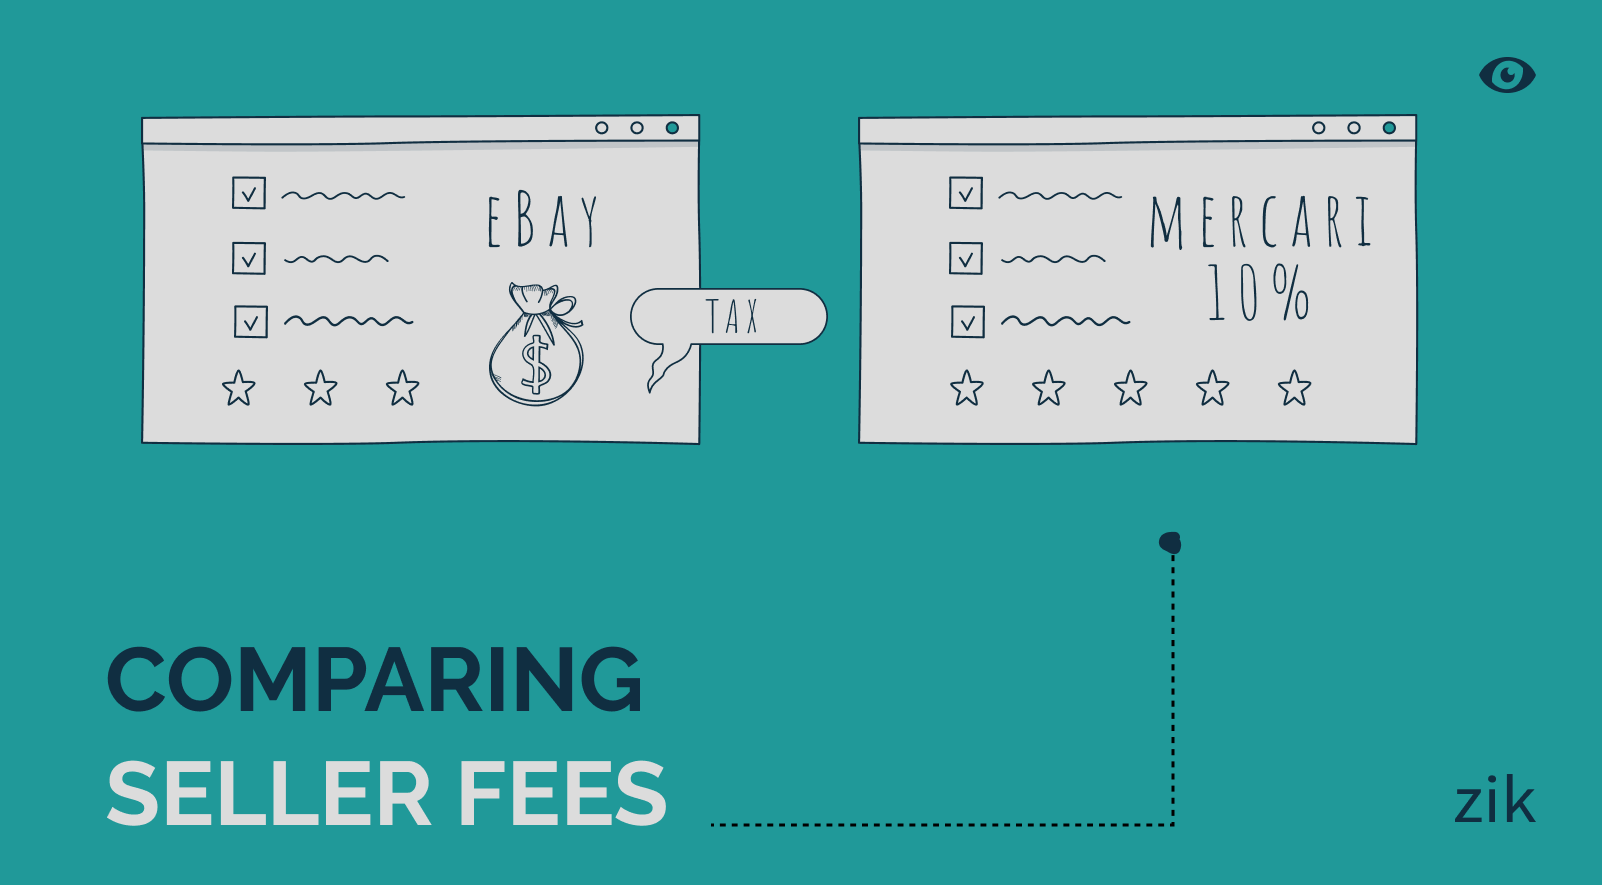 Comparing seller fees